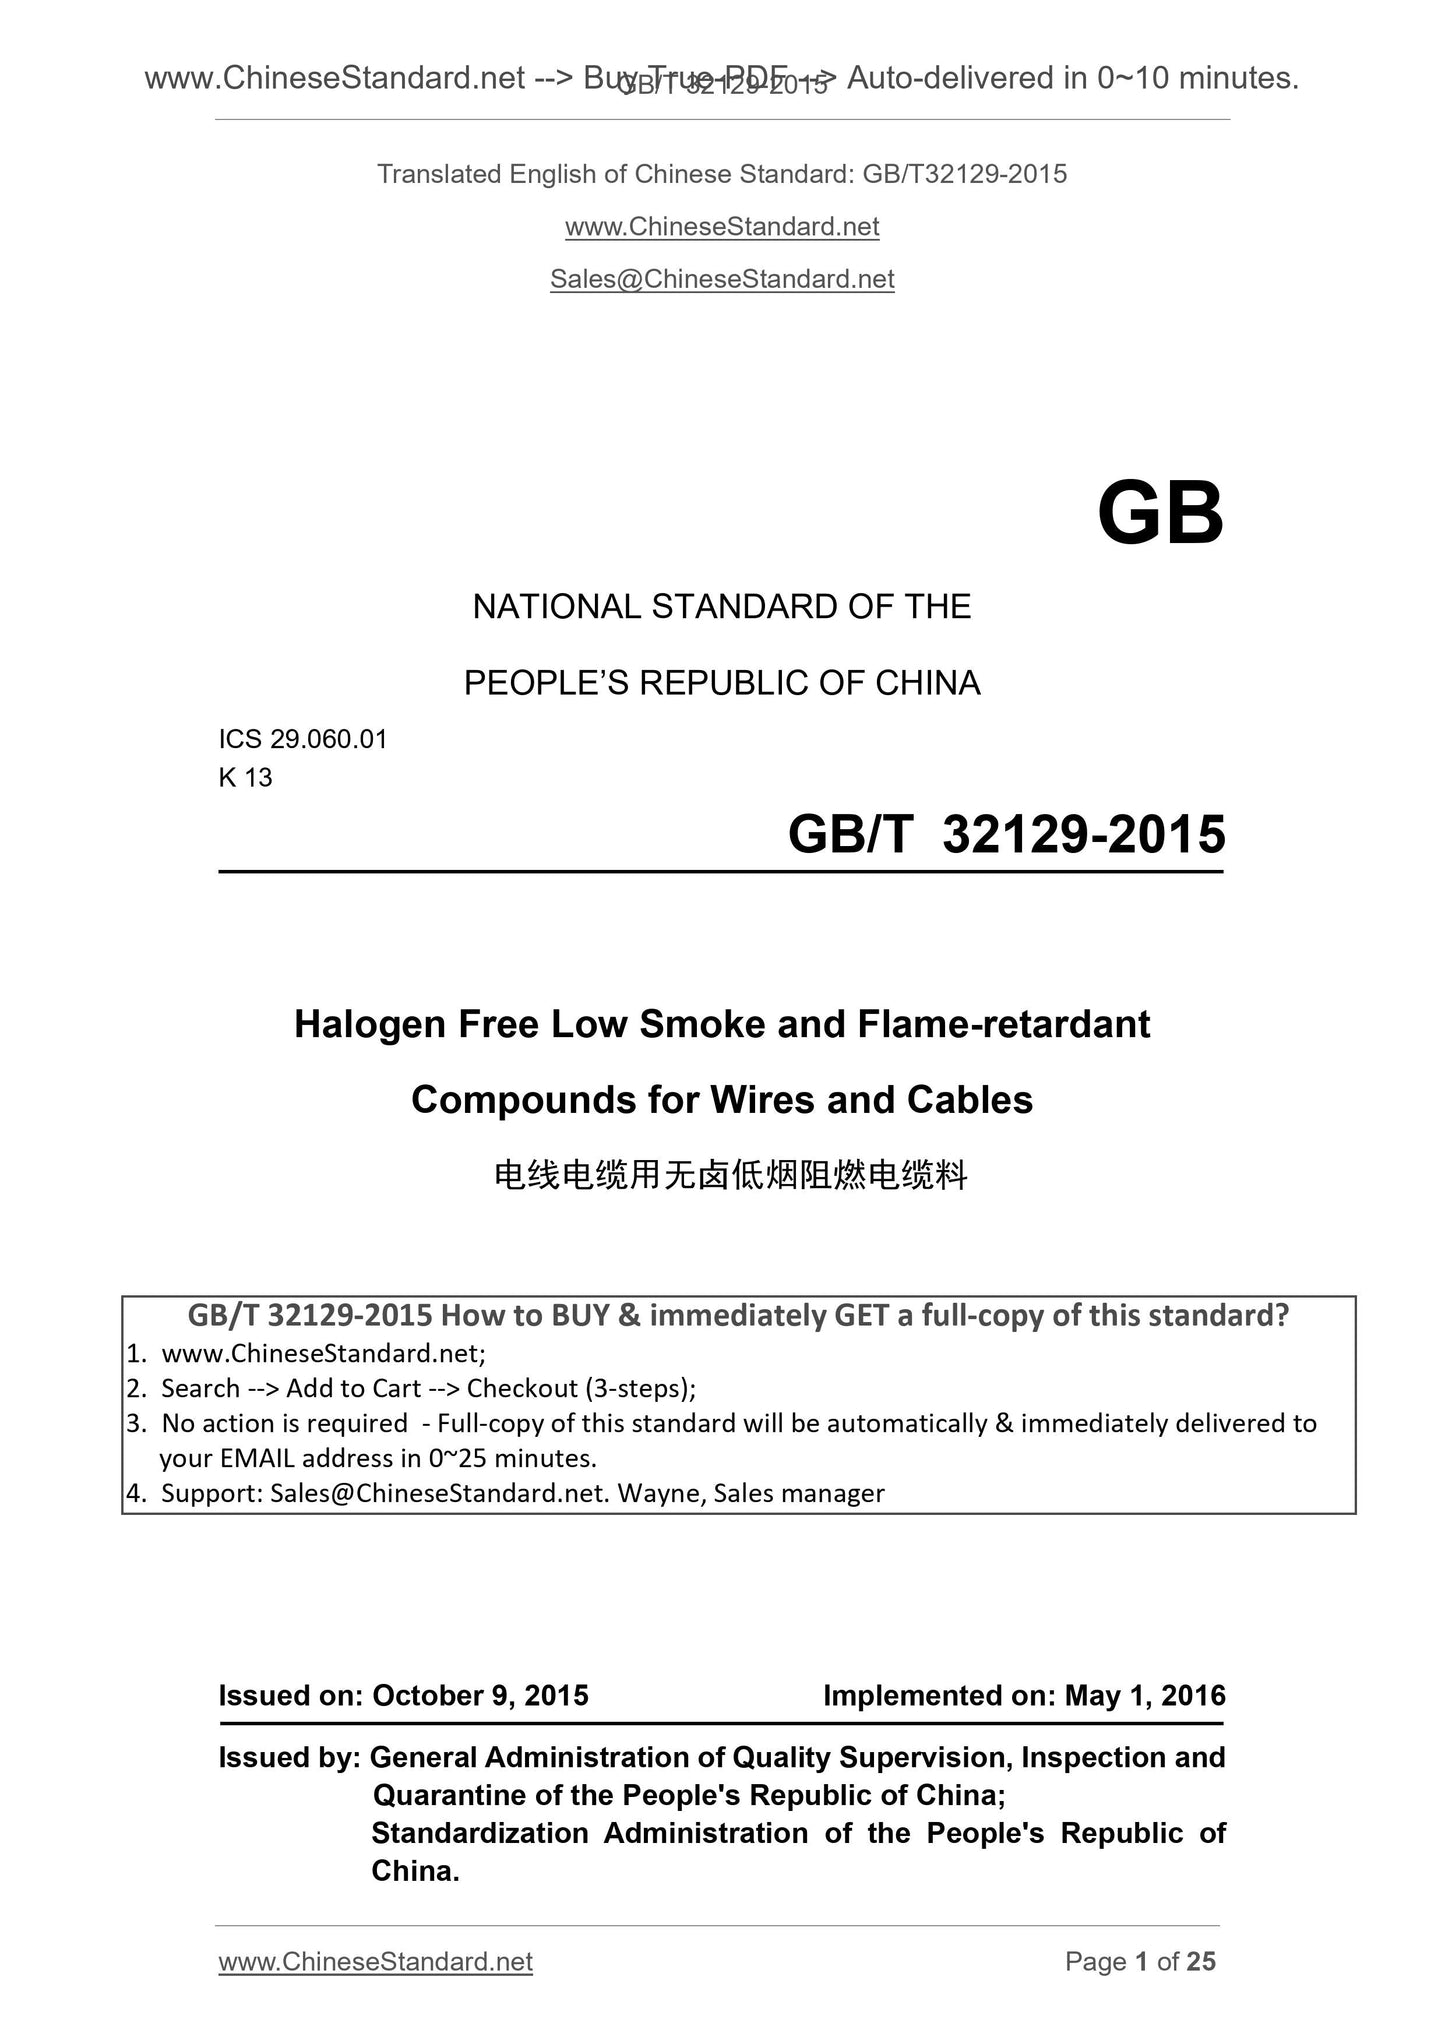 GB/T 32129-2015 Page 1